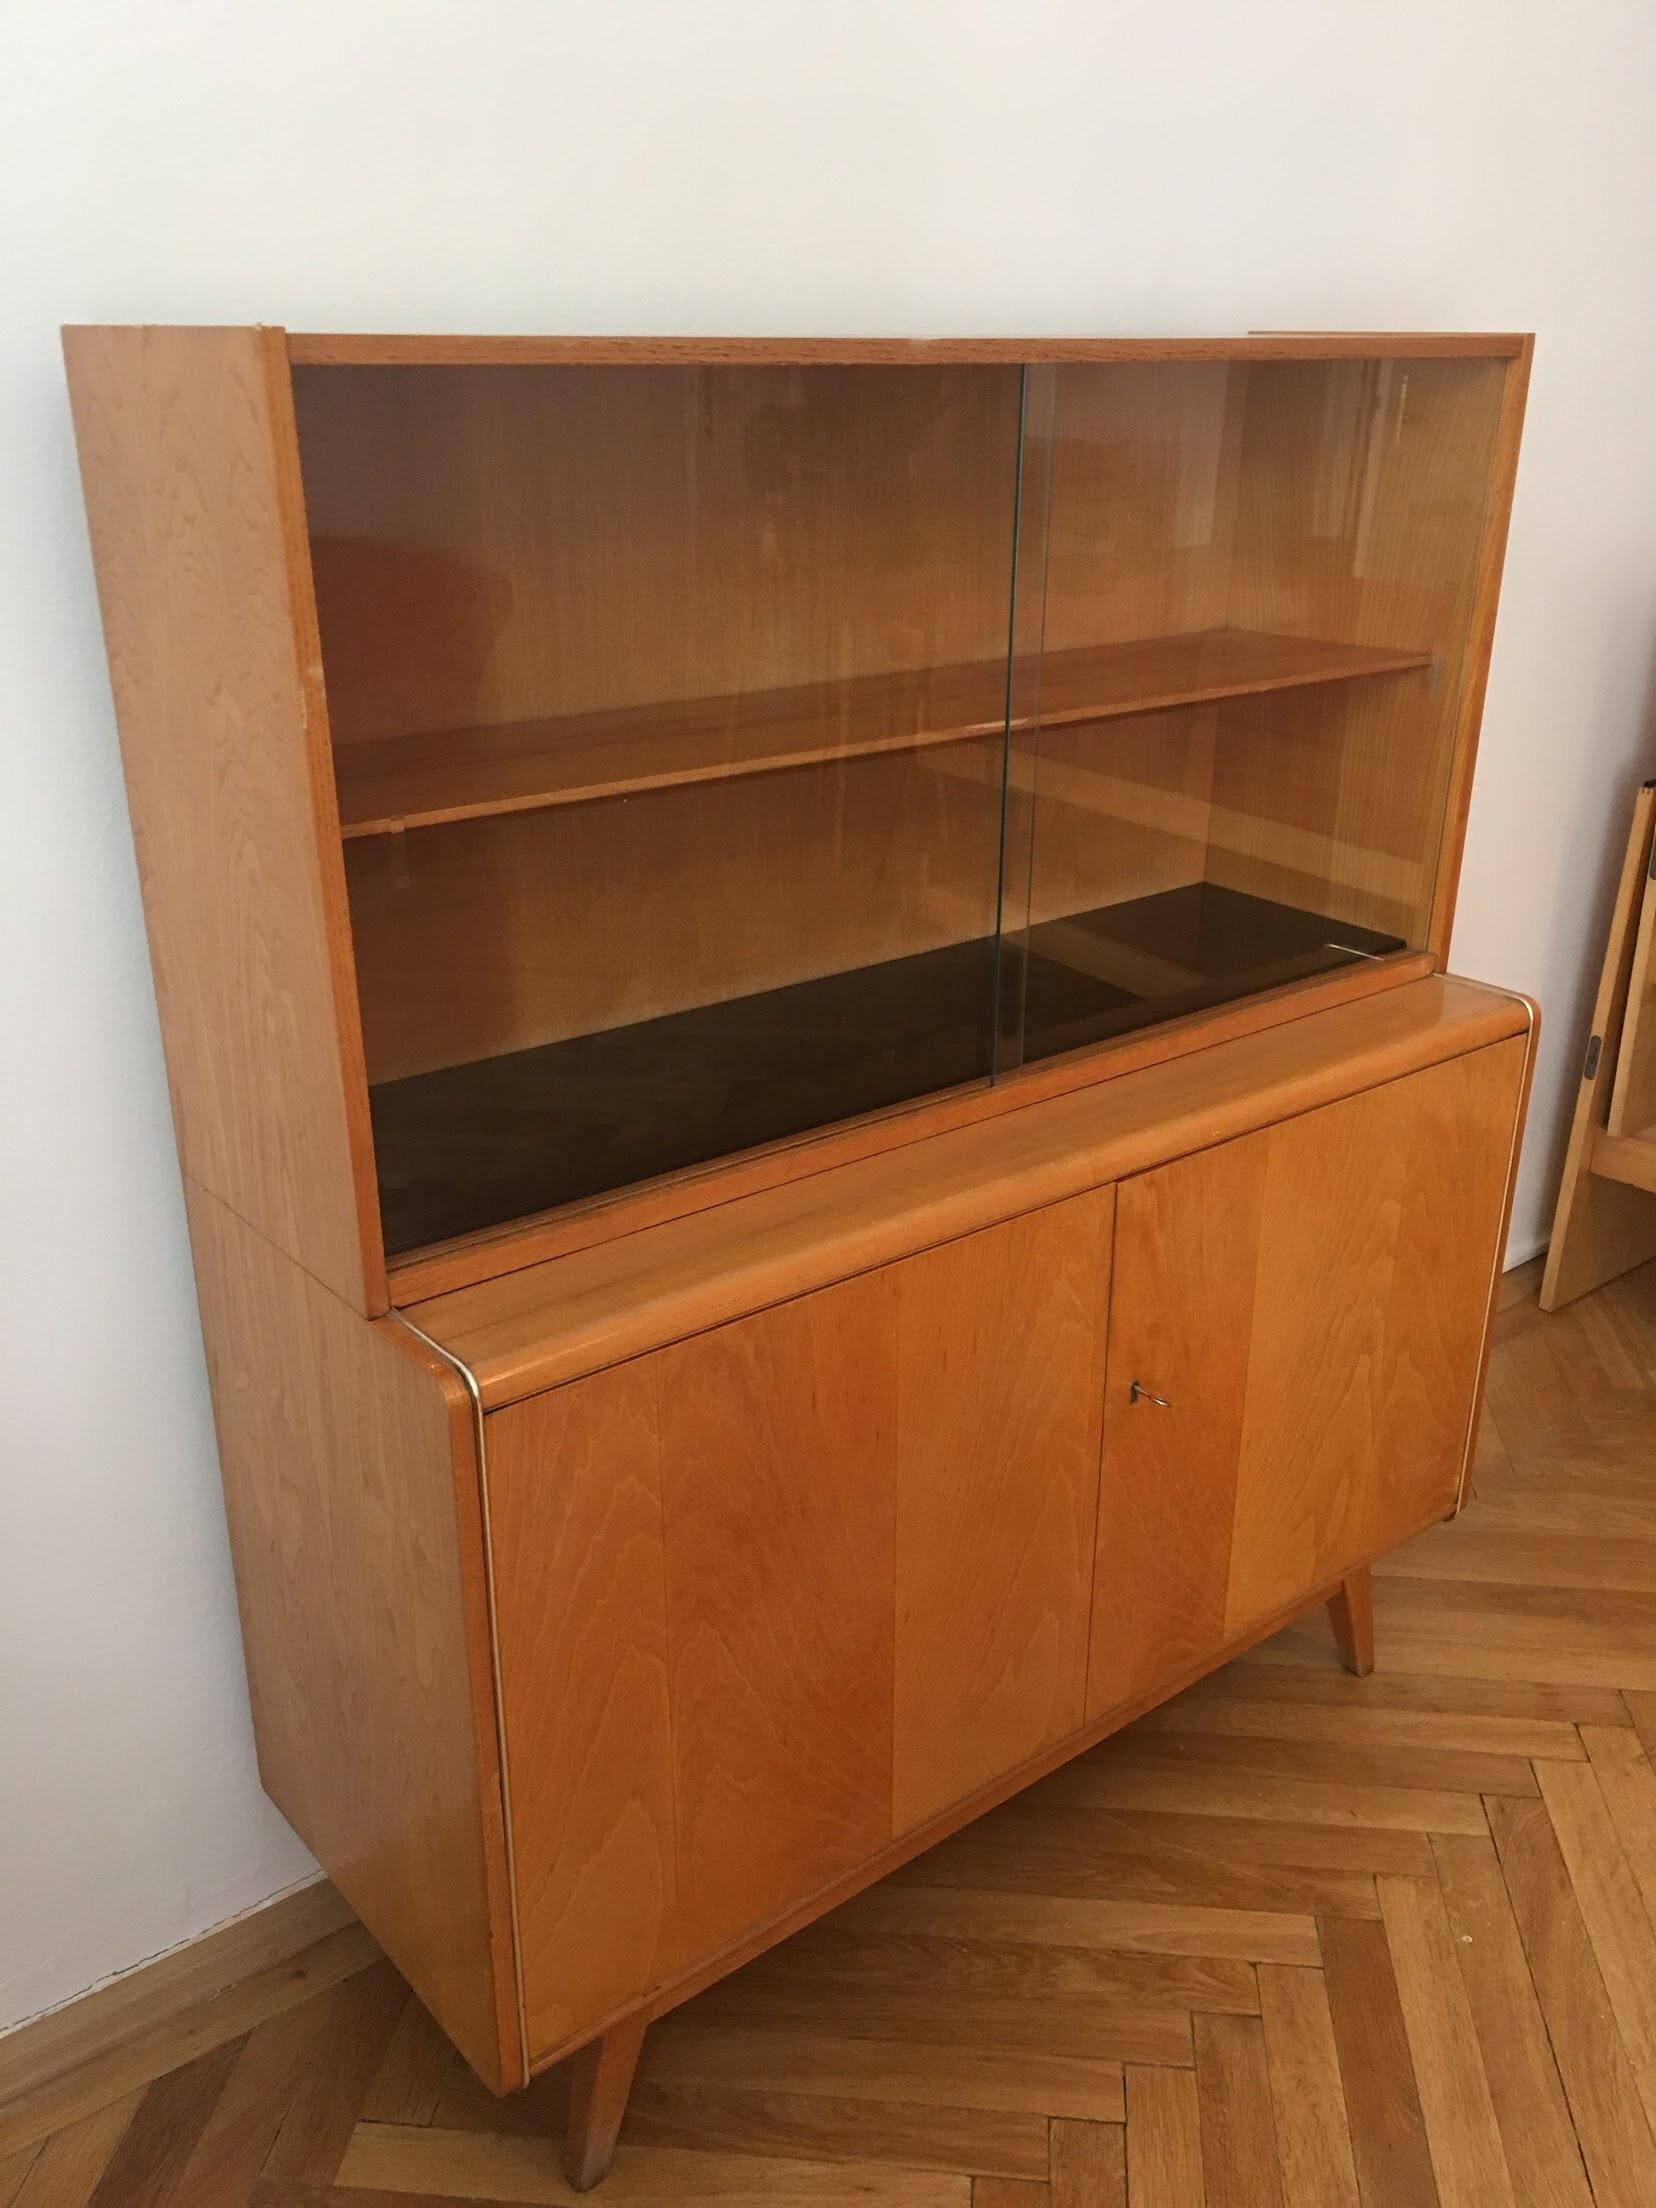 Sideboard with Bookcase from 1960s – like a brand new. Perfect condition.
Made in Czechoslovakia in town Sobeslav – brand Jitona. 
Designer Bohumil Landsman, Hubert Nepozitek
Measures: Length: 118 cm
Width: 43 cm
Height: 136 cm.